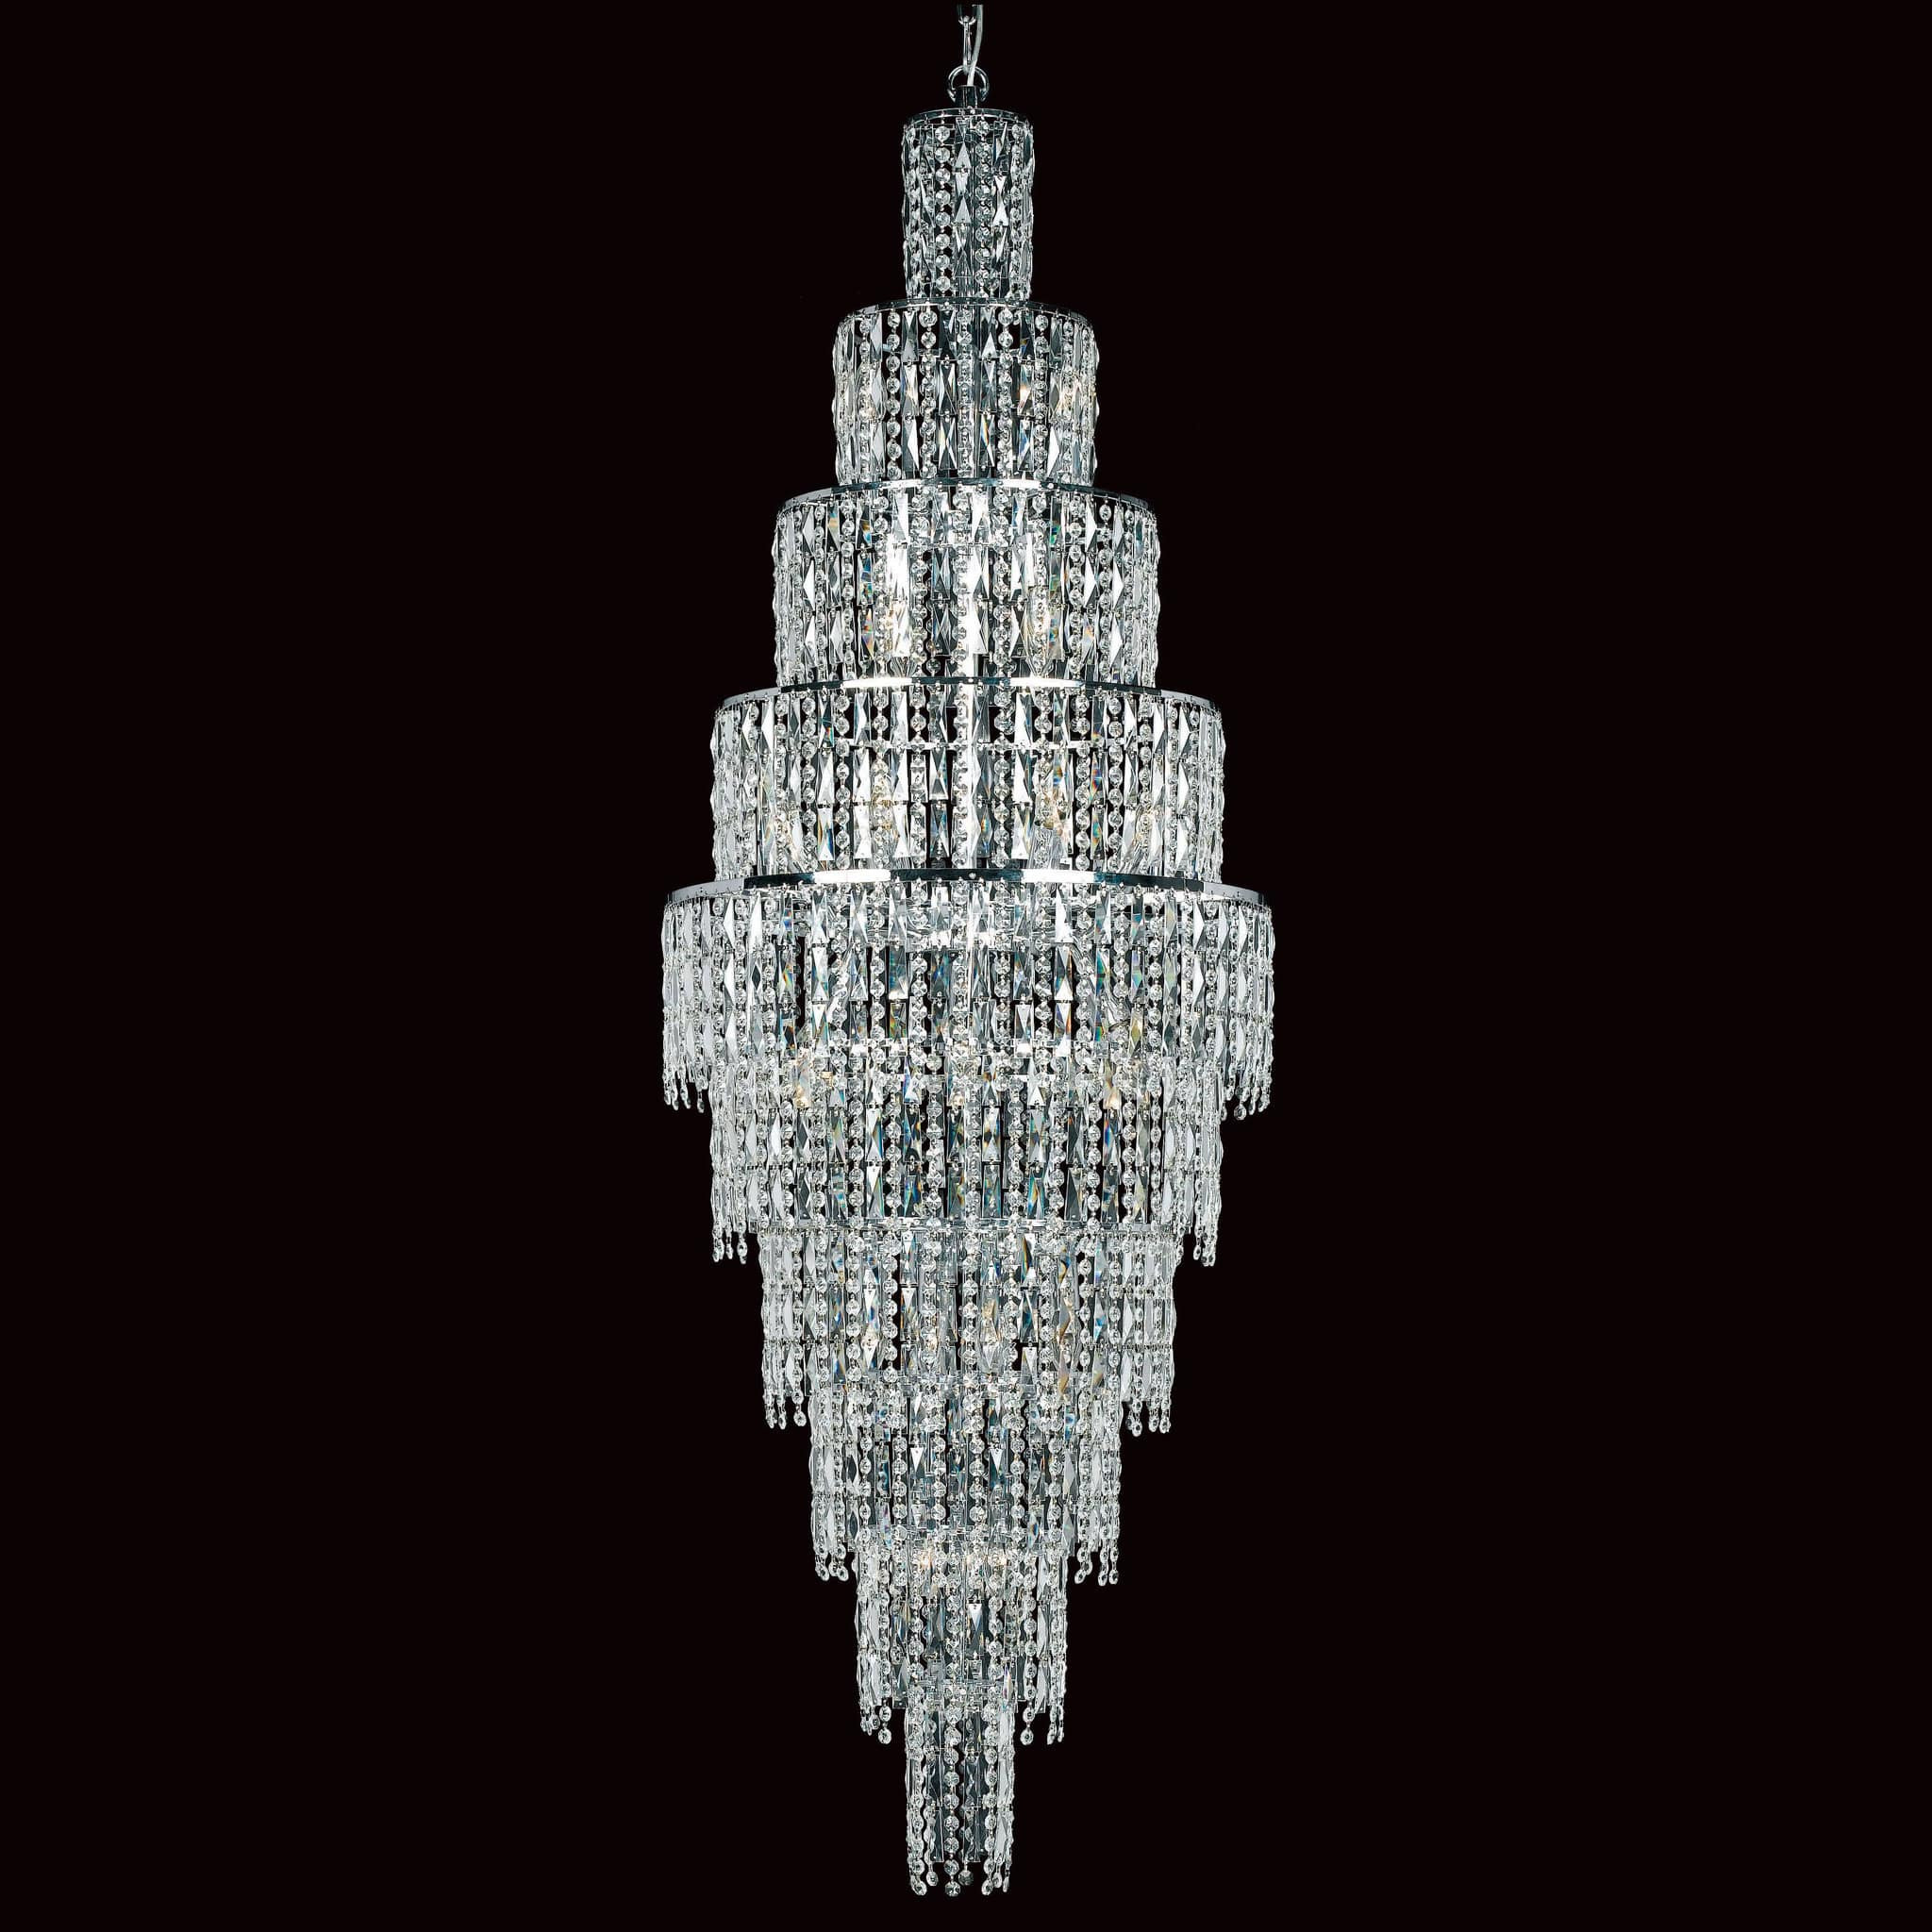 Impex New York 24 Light Glass Icicle Crystal Chandelier CF03220 24 CH